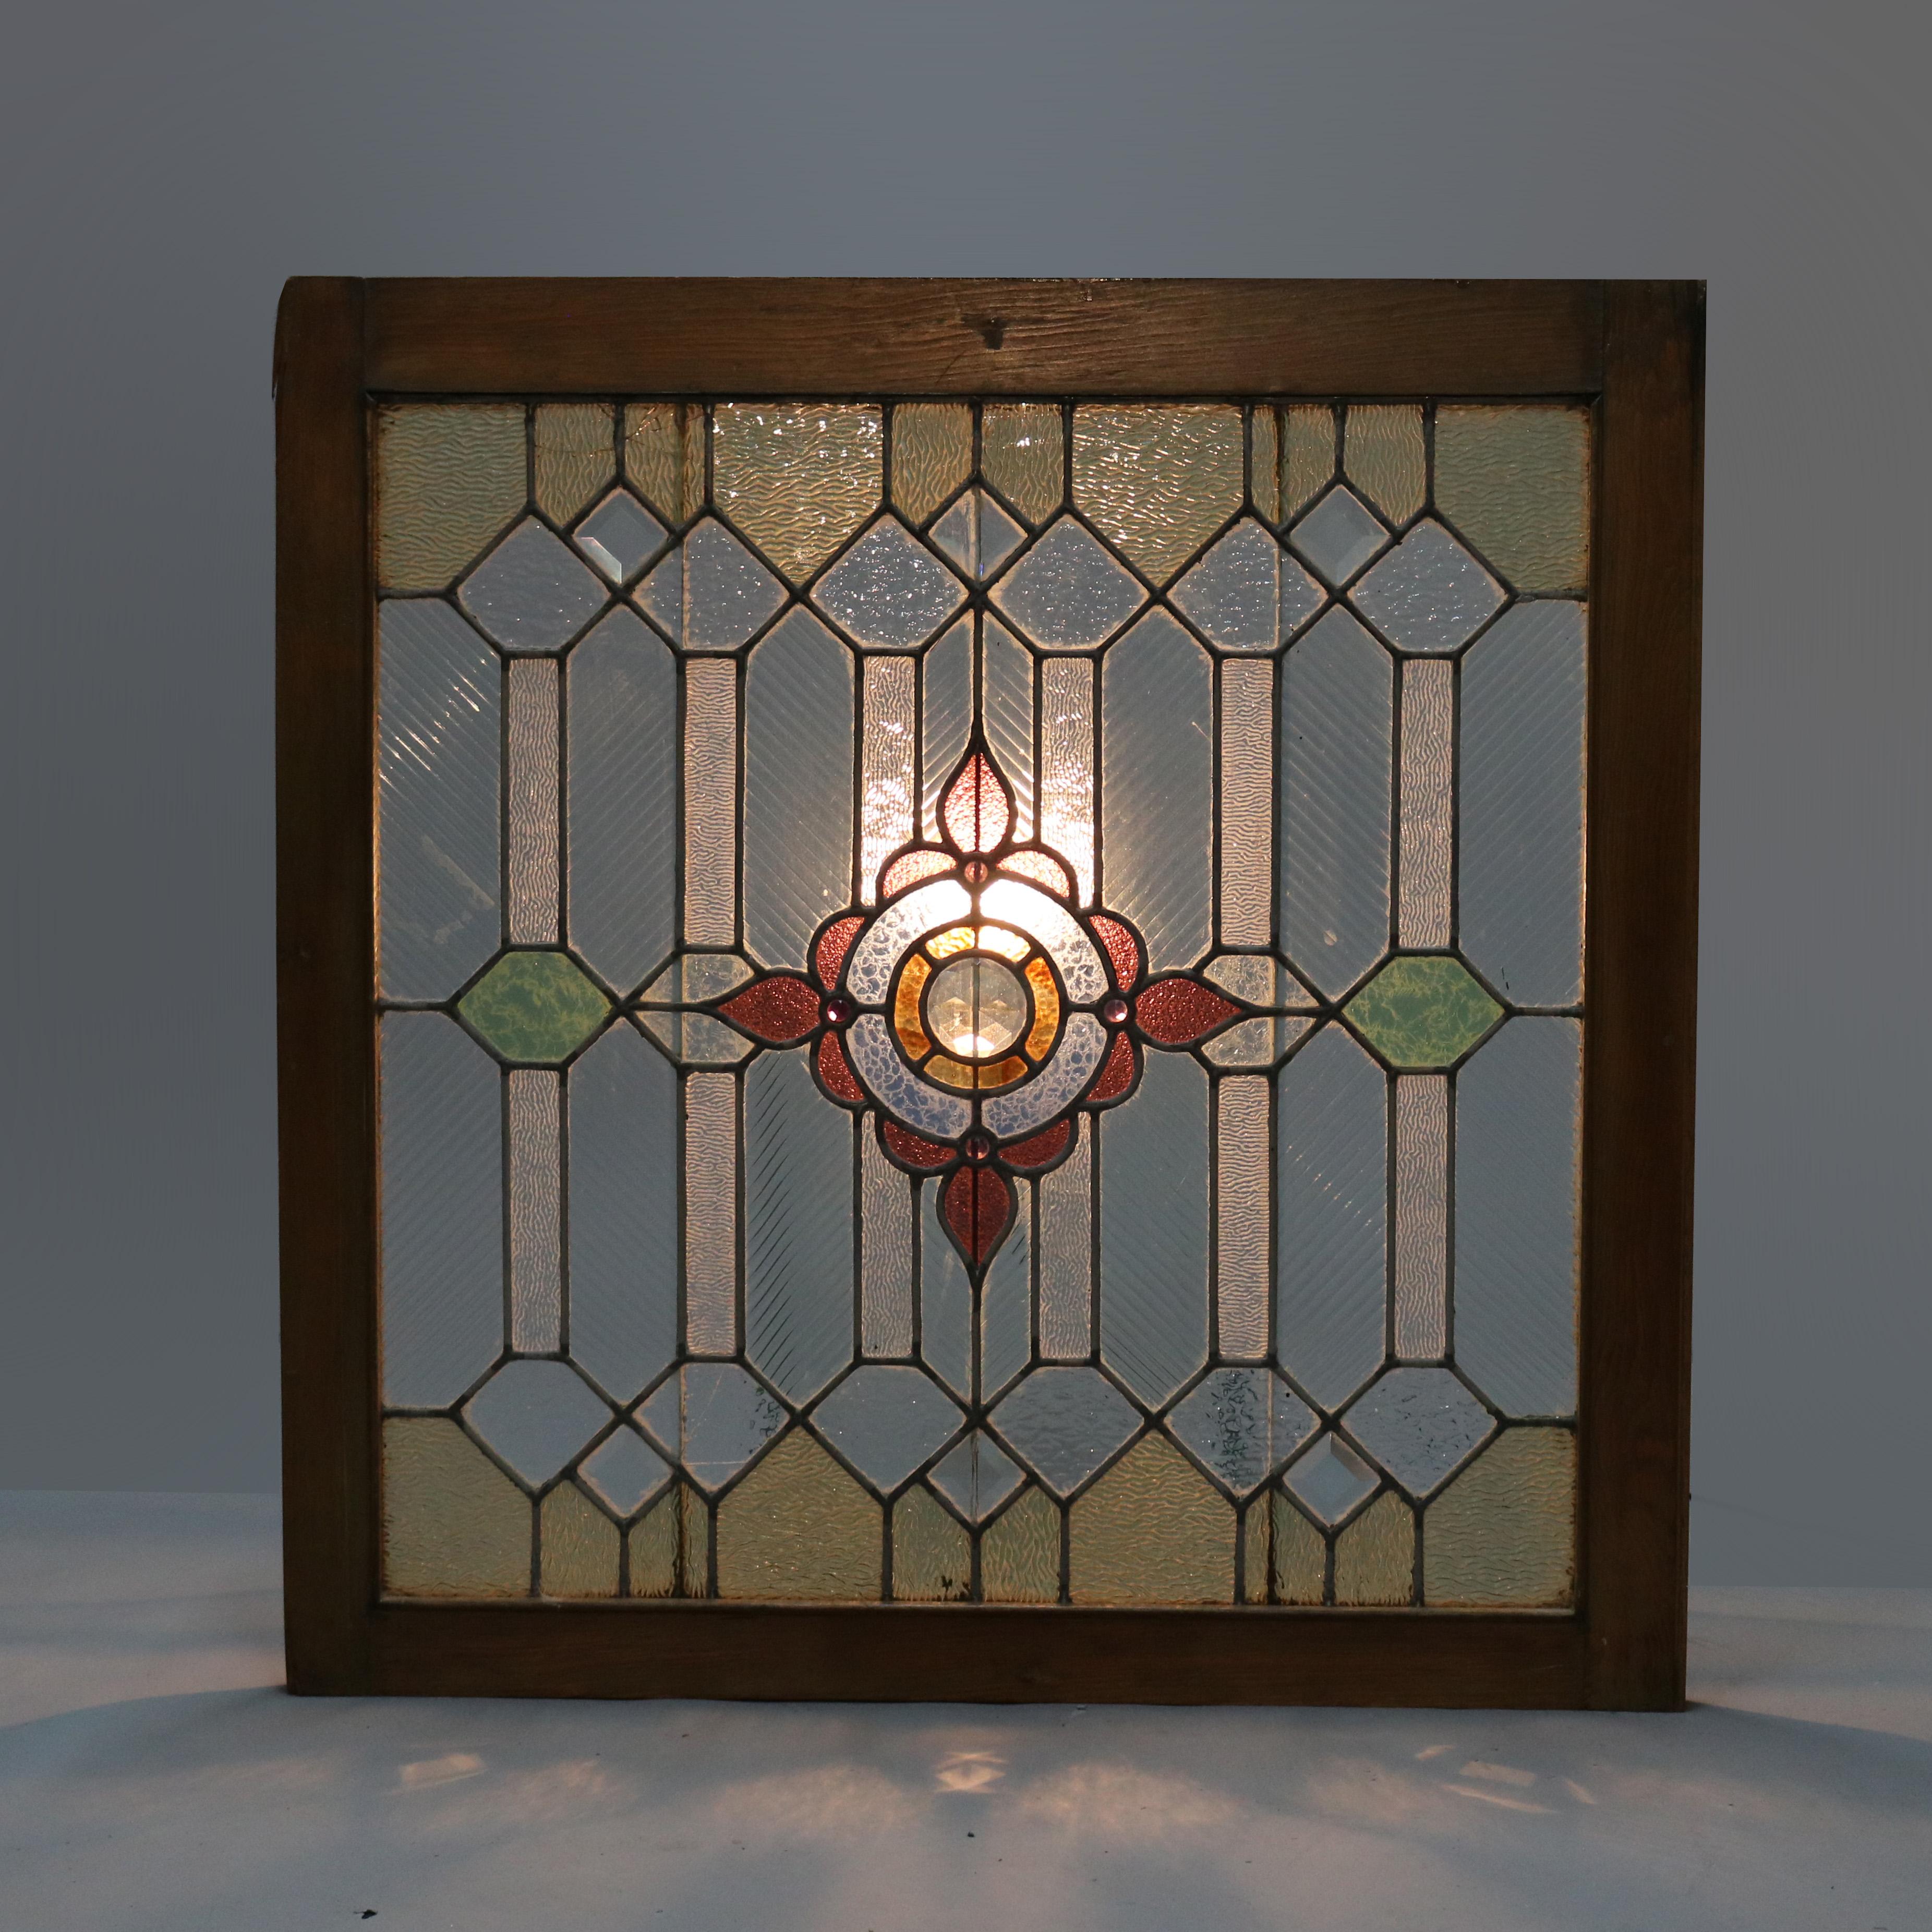 An antique Arts & Crafts windows offers leaded jeweled and stained glass with central stylized foliate medallion element, seated in wood sash, c1910

Measures: 35